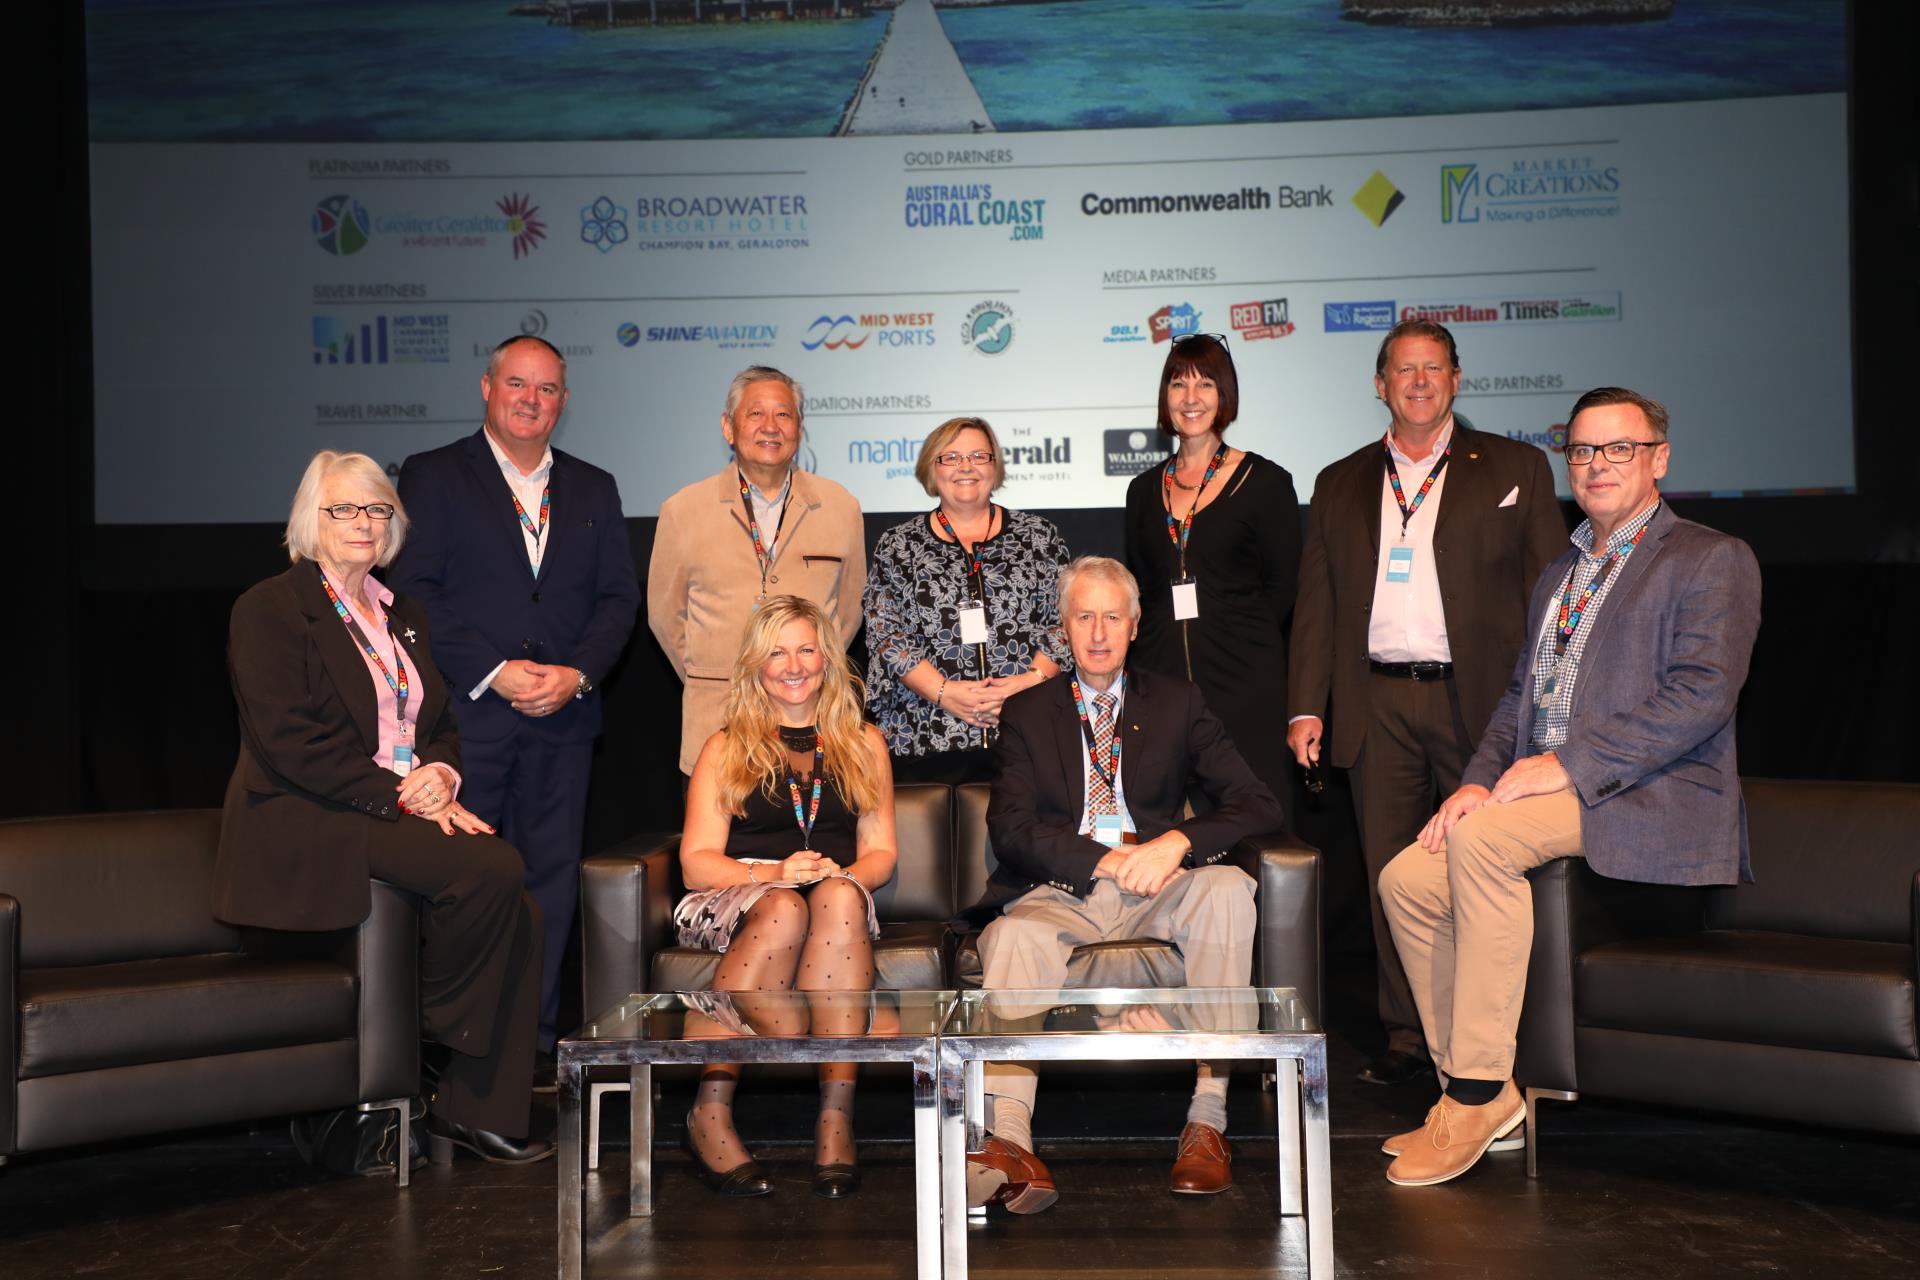 Key tourism industry experts on stage at the Summit